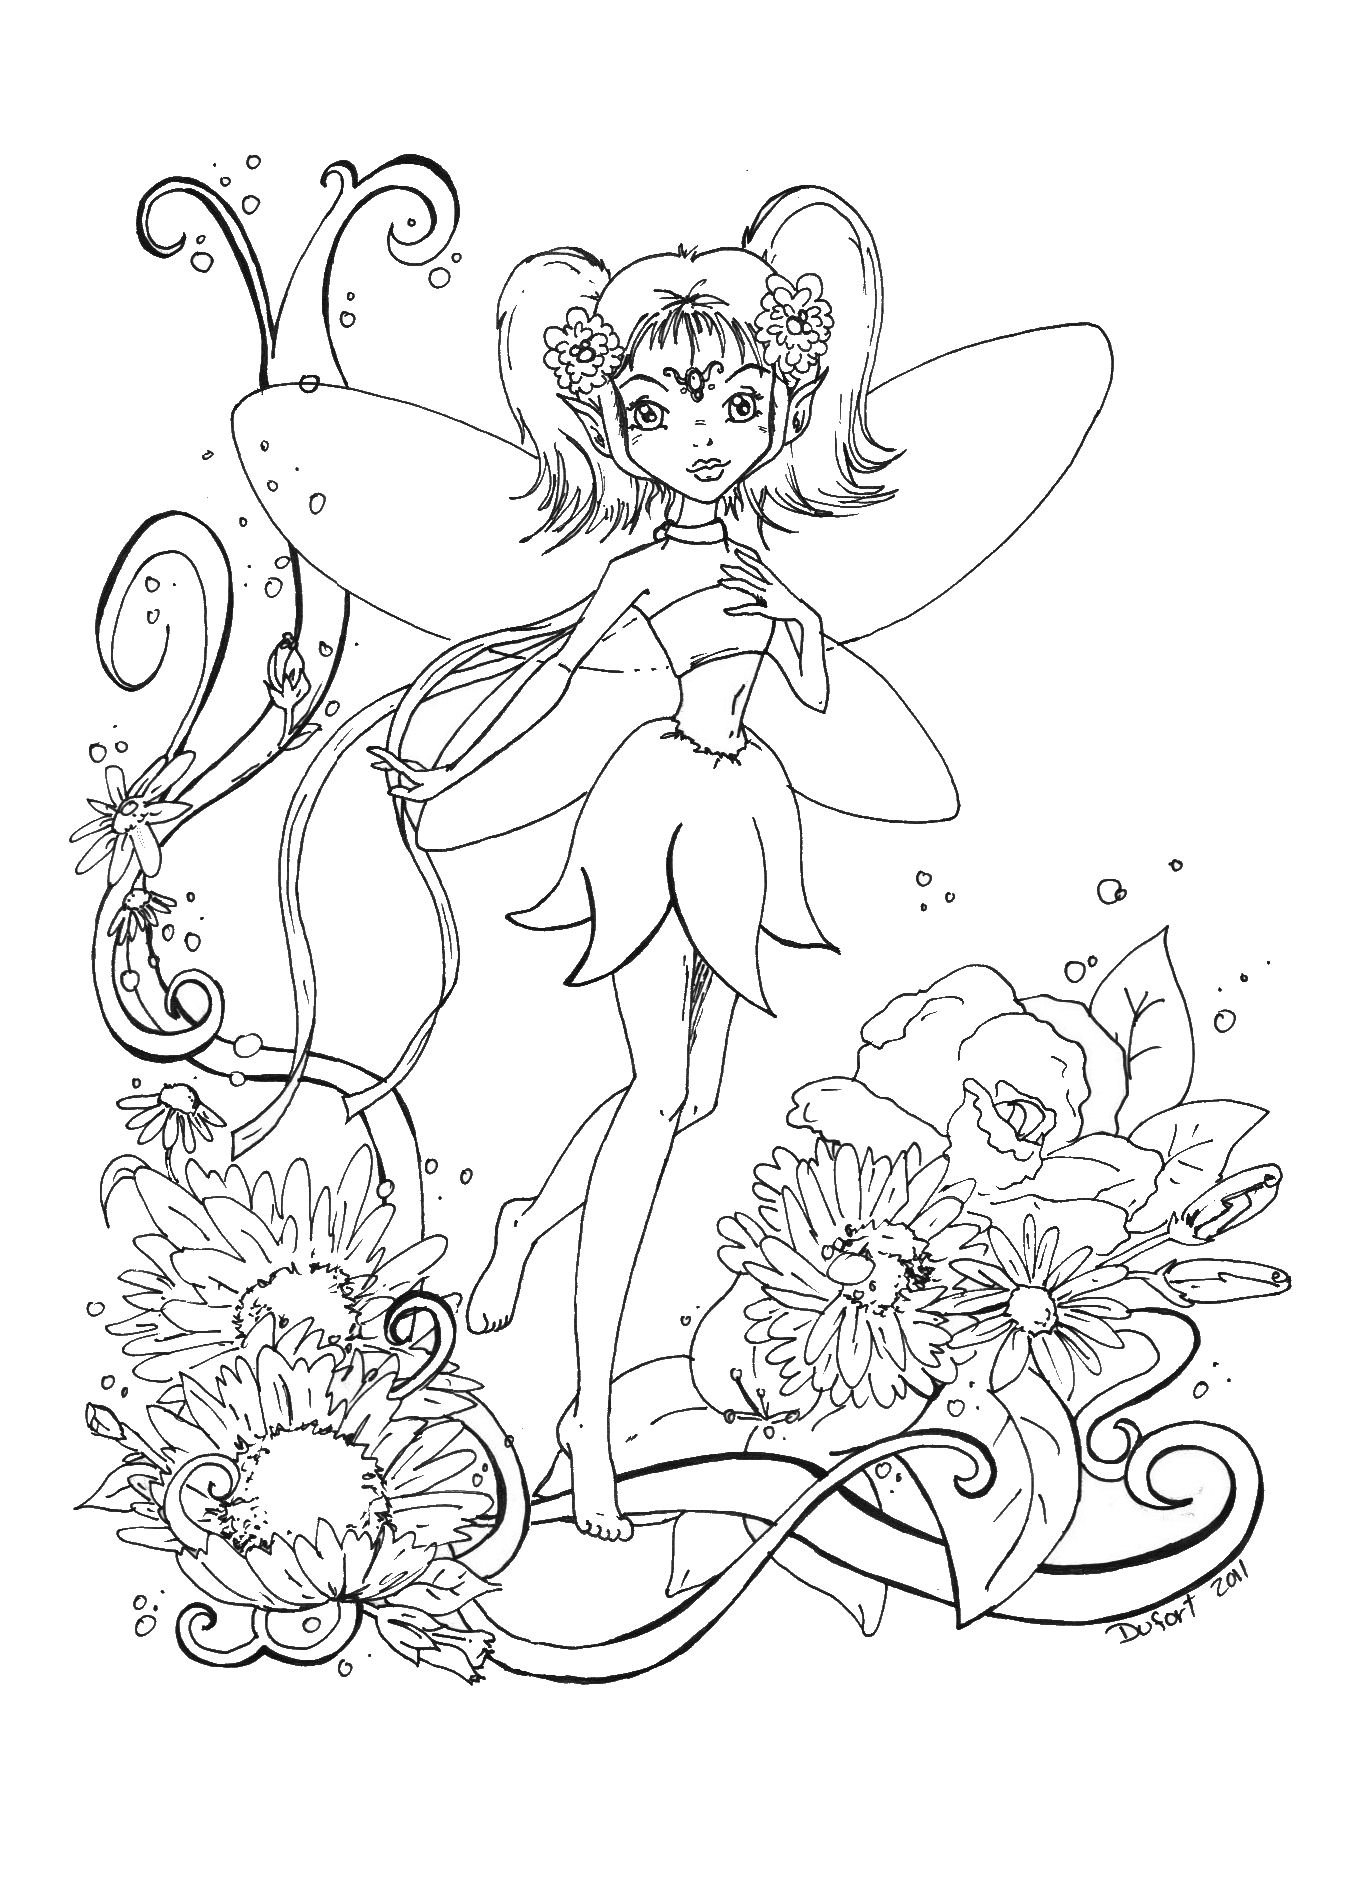 Free Coloring Pages Of Fairies Free Printable Coloring Pages For Adults Dark Fairies